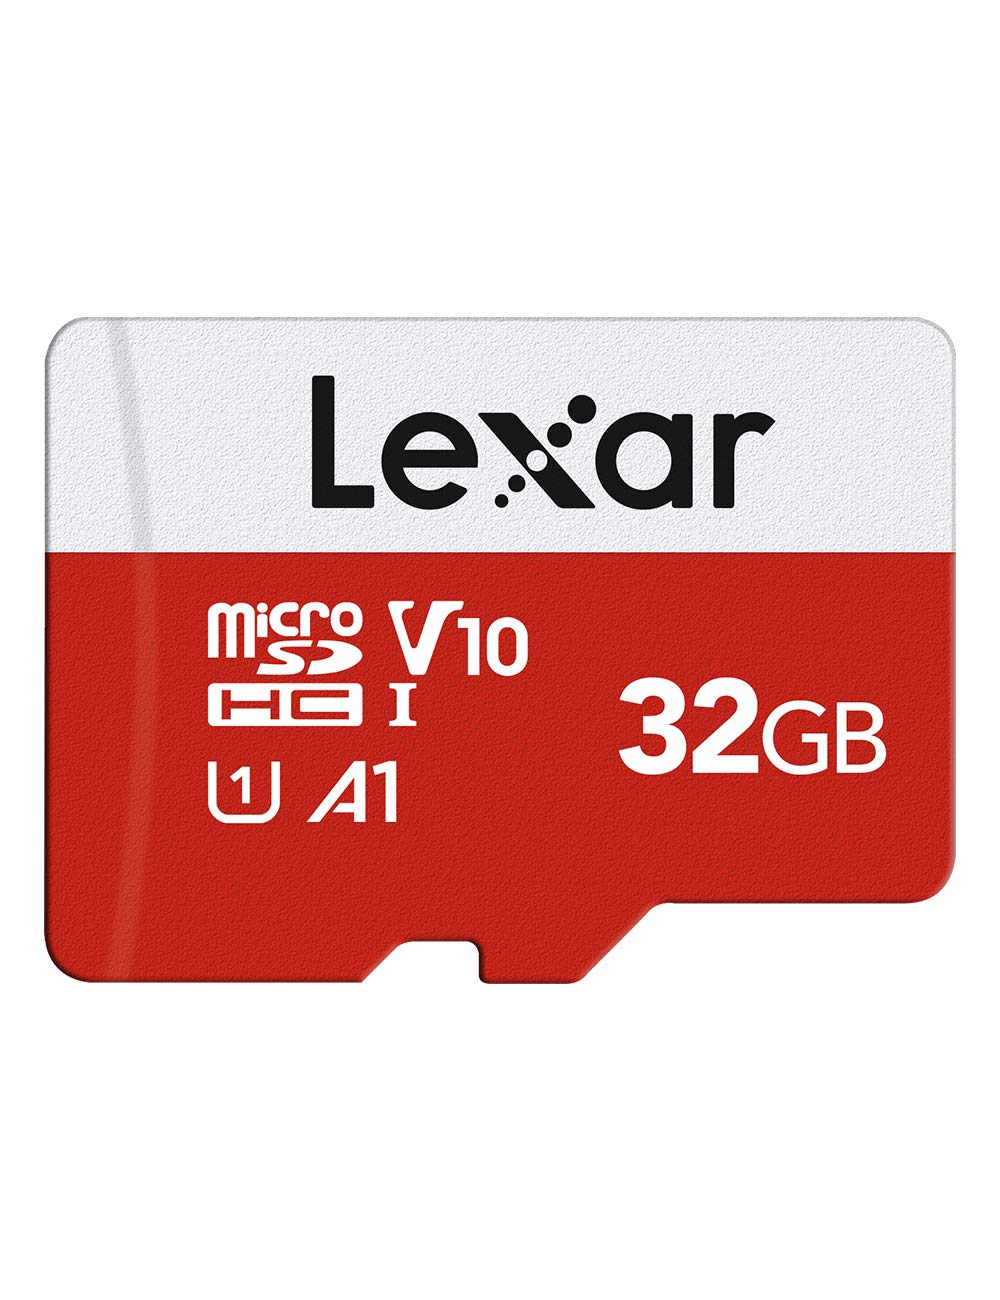 Lexar 32GB Micro SD Card, microSDHC UHS-I Flash Memory Card with Adapter - Up to 100MB/s, U1, Class10, V10, A1, High Speed TF Card